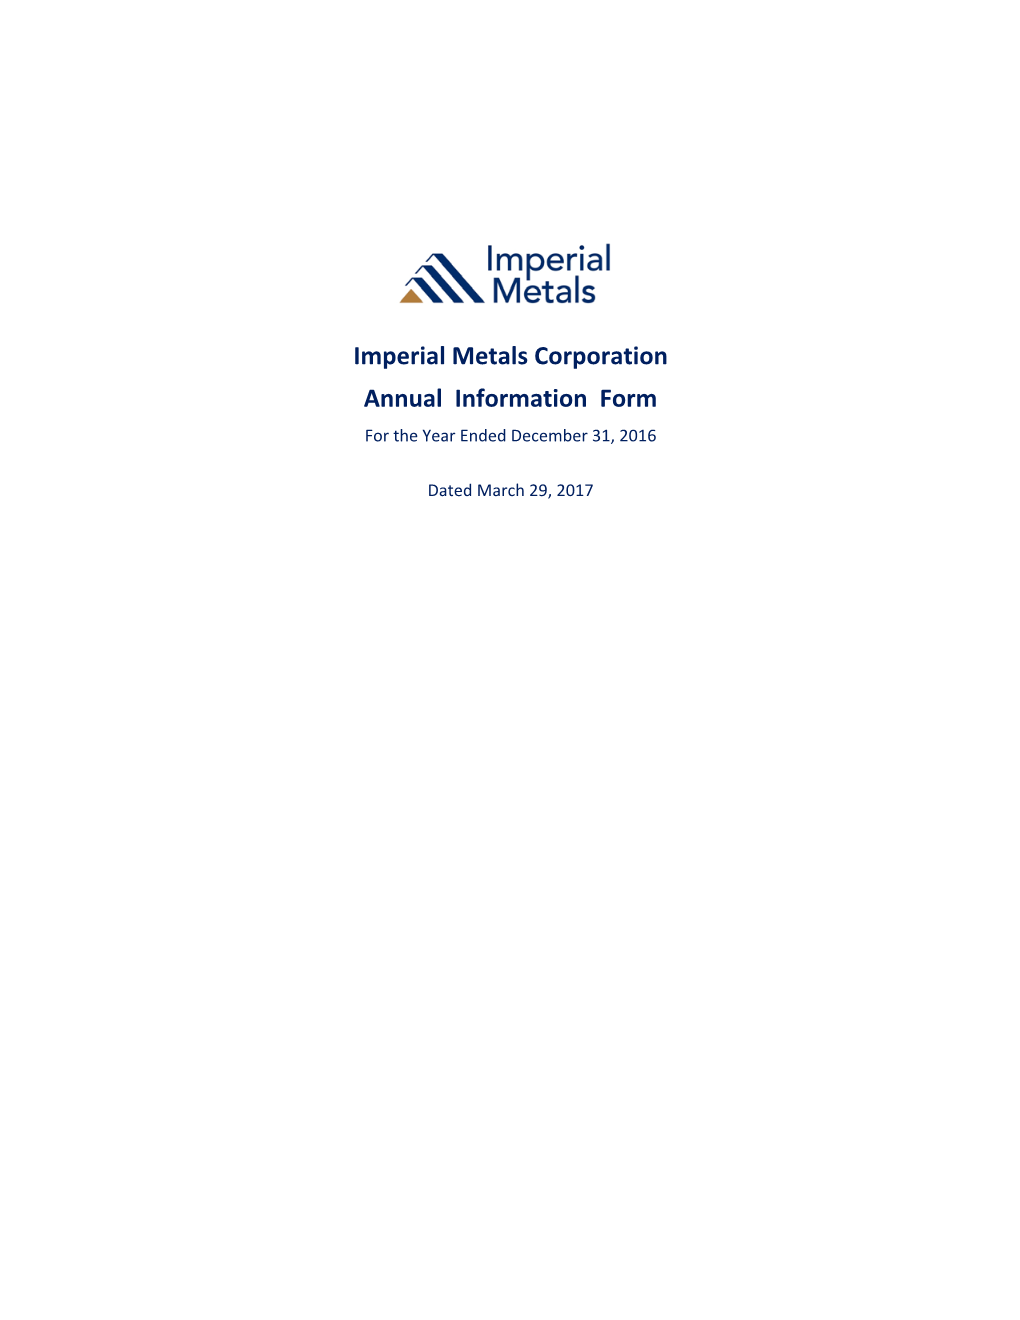 Imperial Metals Corporation Annual Information Form for the Year Ended December 31, 2016